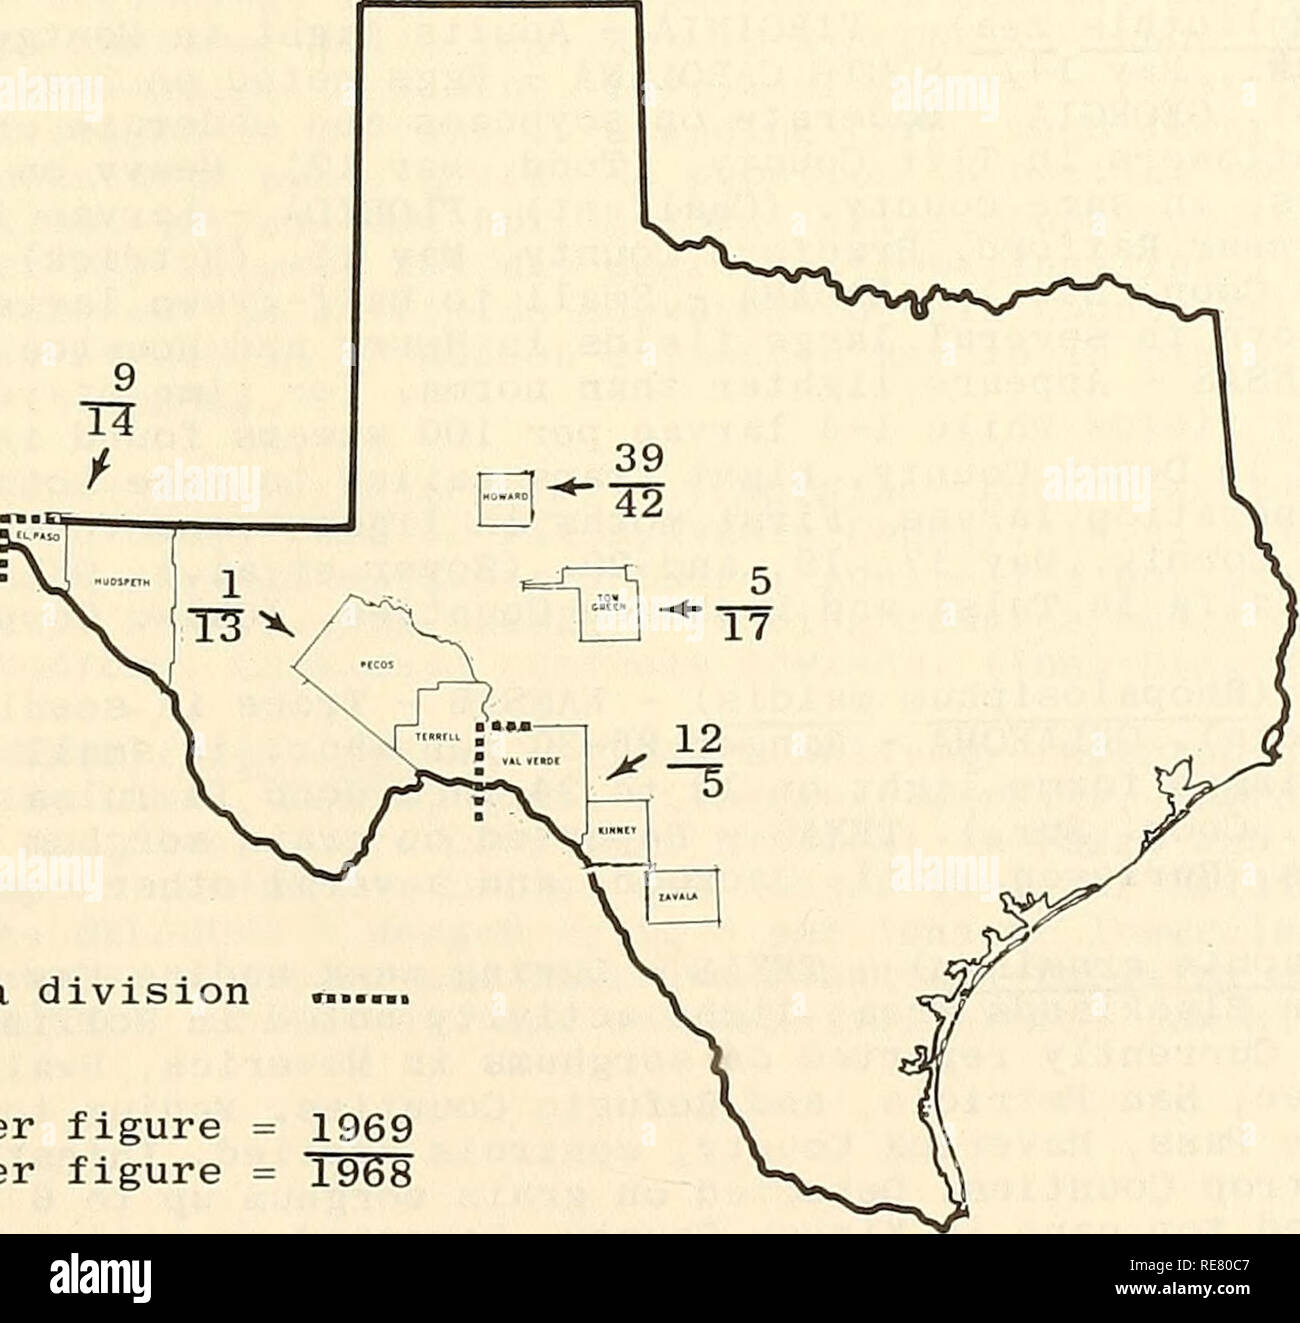 . Cooperative economic insect report. Beneficial insects; Insect pests. 373 SPECIAL INSECTS OF REGIONAL SIGNIFICANCE Potato Psyllid Survey, Spring Breeding Areas of Texas The potato psyllid (Paratrioza cockerelli (Sulc)) survey in Texas was completed April 18, 1969. Compared with 1968, psyllid counts remained constant in the Big Spring area; decreased in the San Angelo, Marathon-Sanderson, and El Paso areas; and increased in the Del Rio area. Conditions have been unusually dry in the survey areas this year. Lycium host plants are in good to excellent condition in all areas and heavily leafed.  Stock Photo